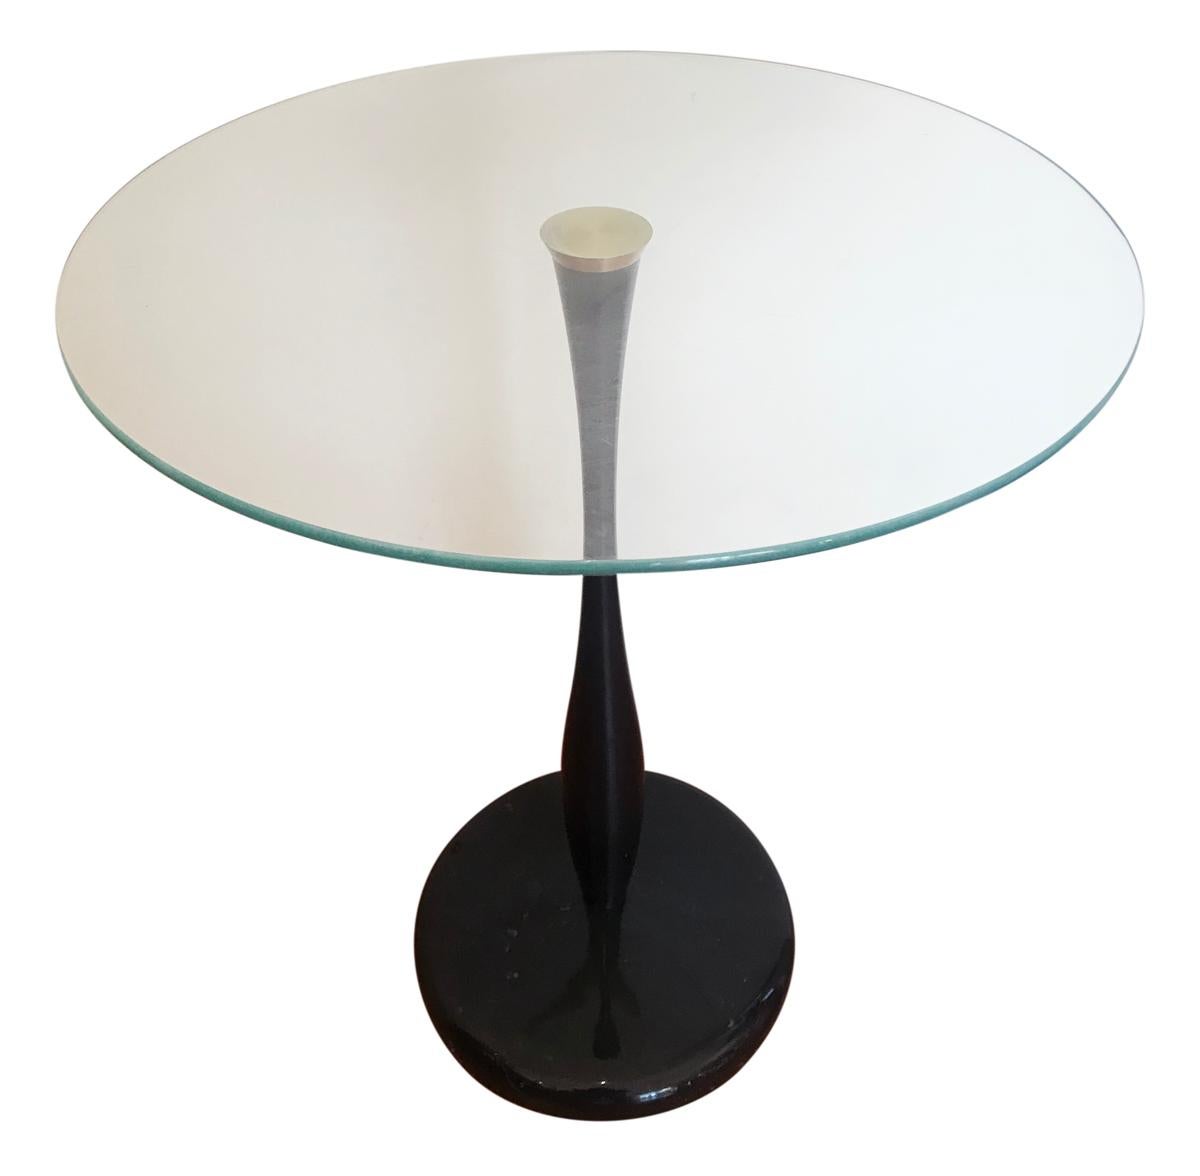 A handsome matching set of glass drink tables designed and produced by Kaiser Newman in the 1990s. The tables features a black polished stone base and a spun aluminum stem with glass top. Clean ready to use condition.